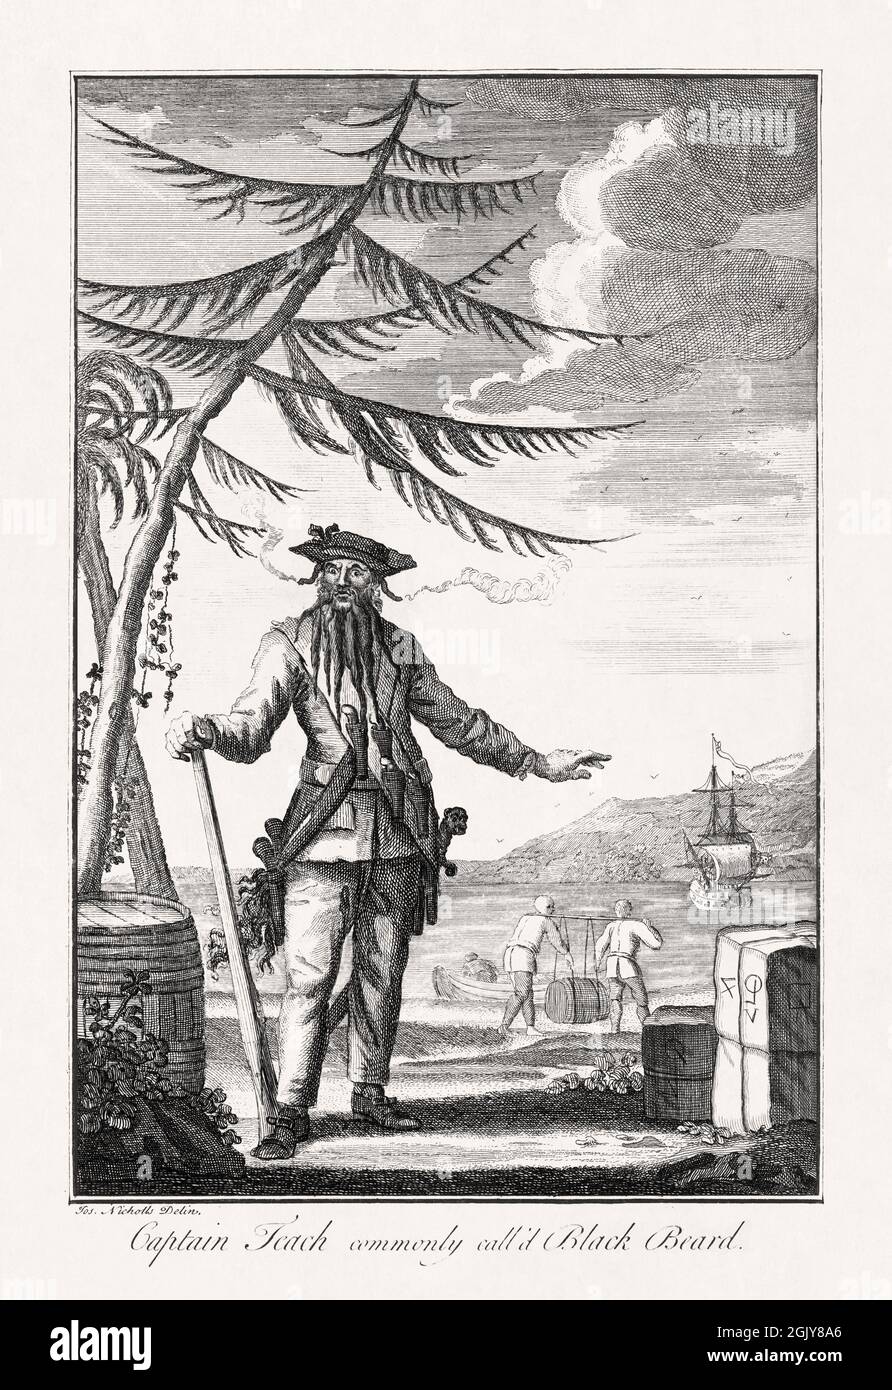 Illustration of Captain Teach alias Black-Beard made in 1736 by Joseph Nicholls to illustrate a book about piracy writen by Daniel Defoe. Stock Photo